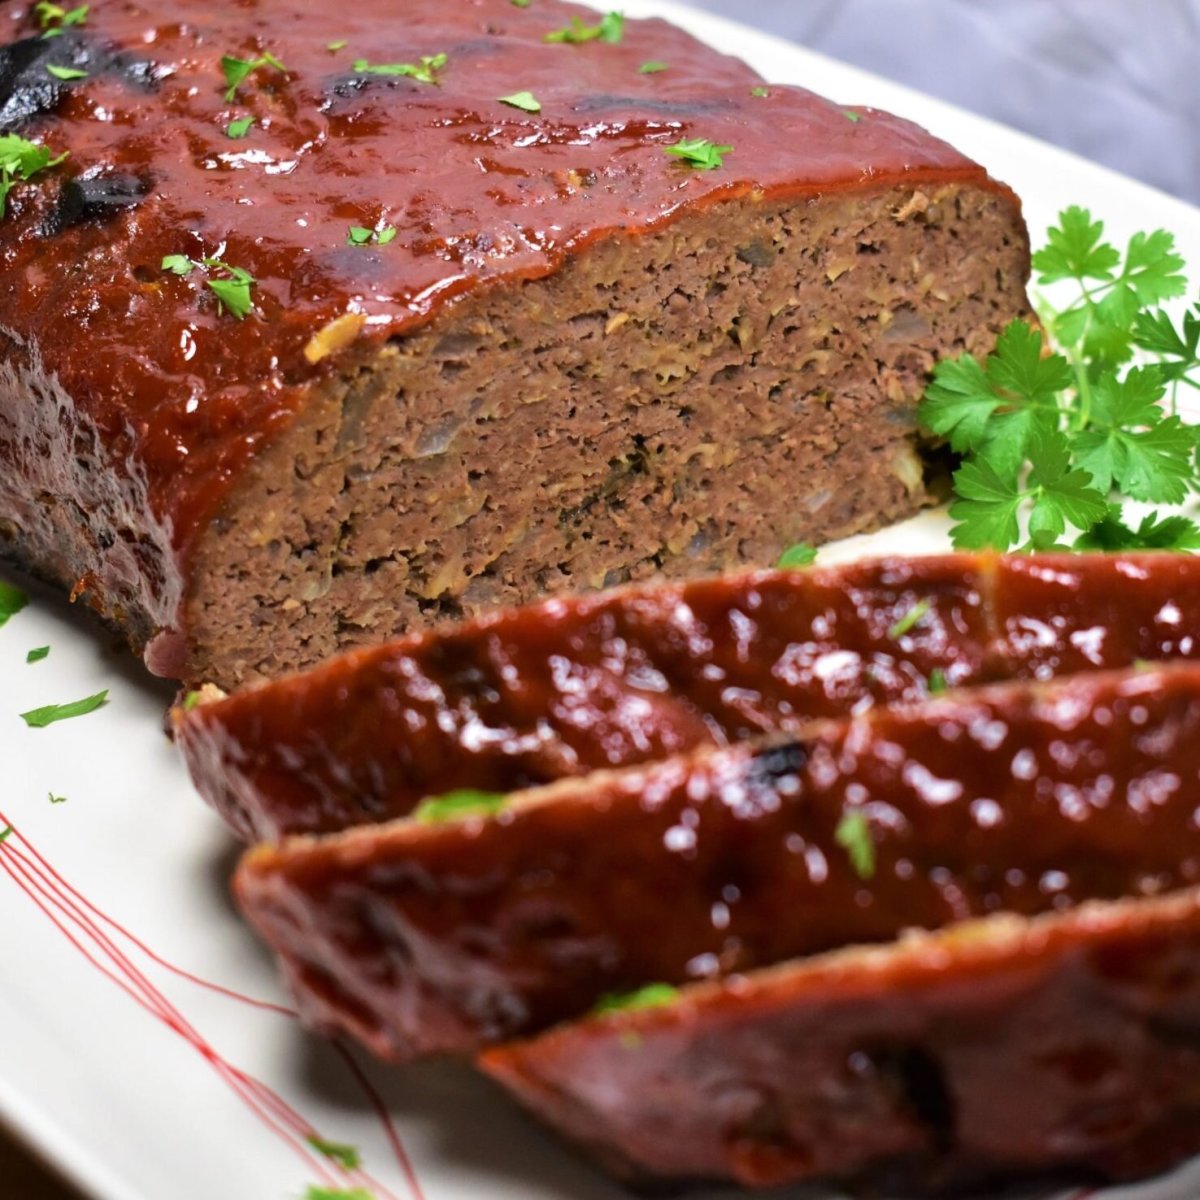 In 1948, meat loaf was a popular food trend. 